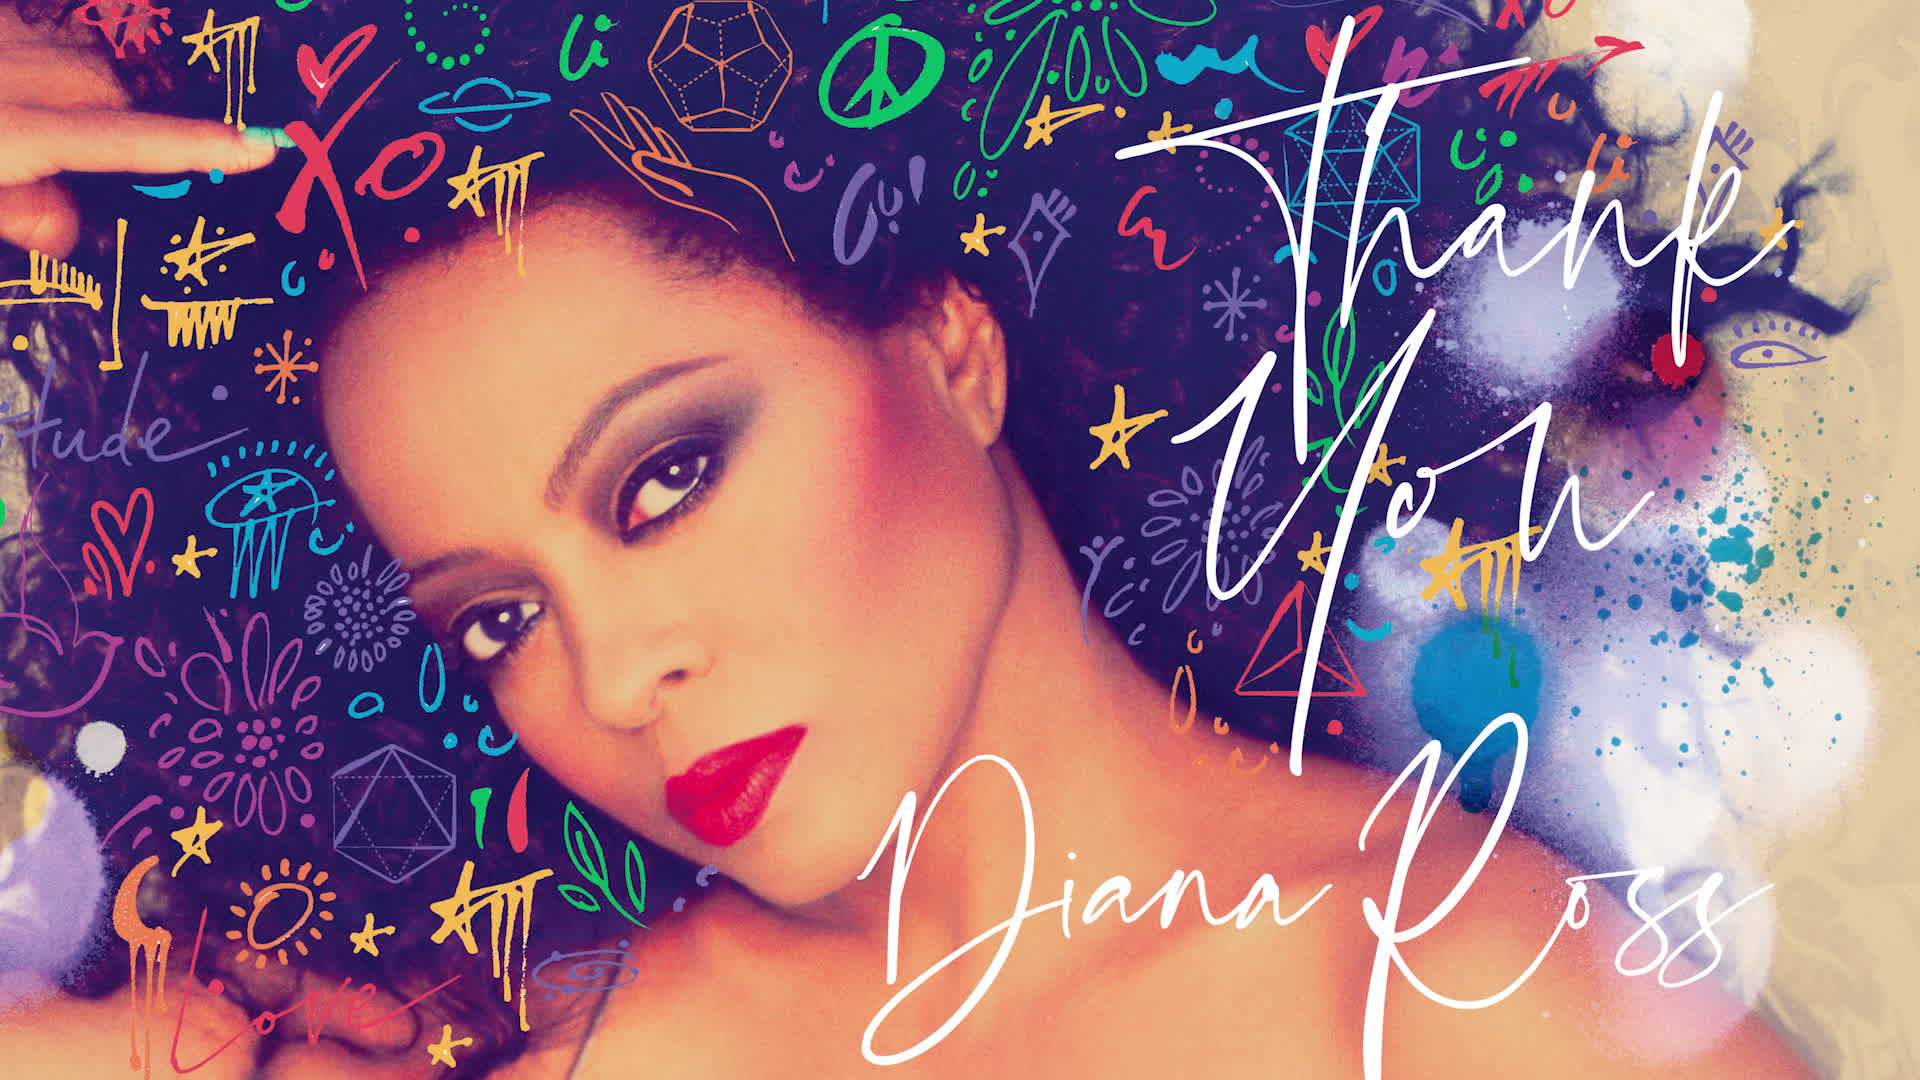 Diana Ross - Thank You (Audio)